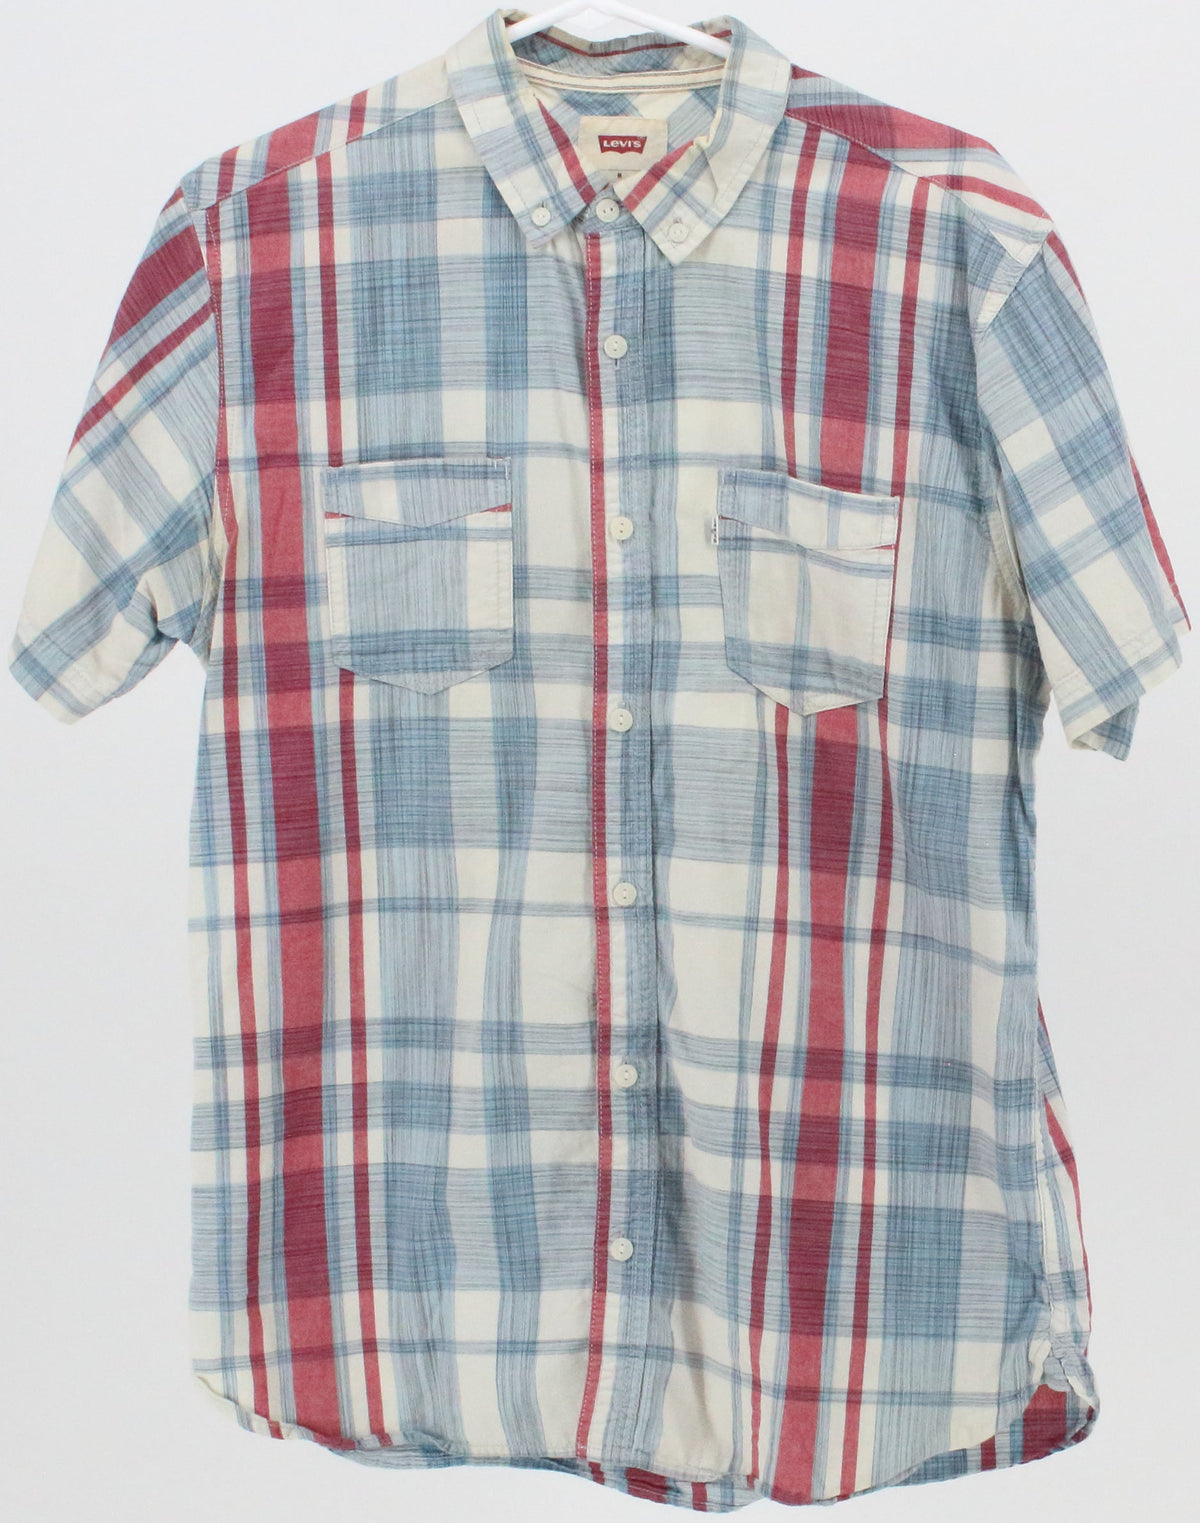 Levis Blue Off White and Red Plaid Short Sleeve Shirt